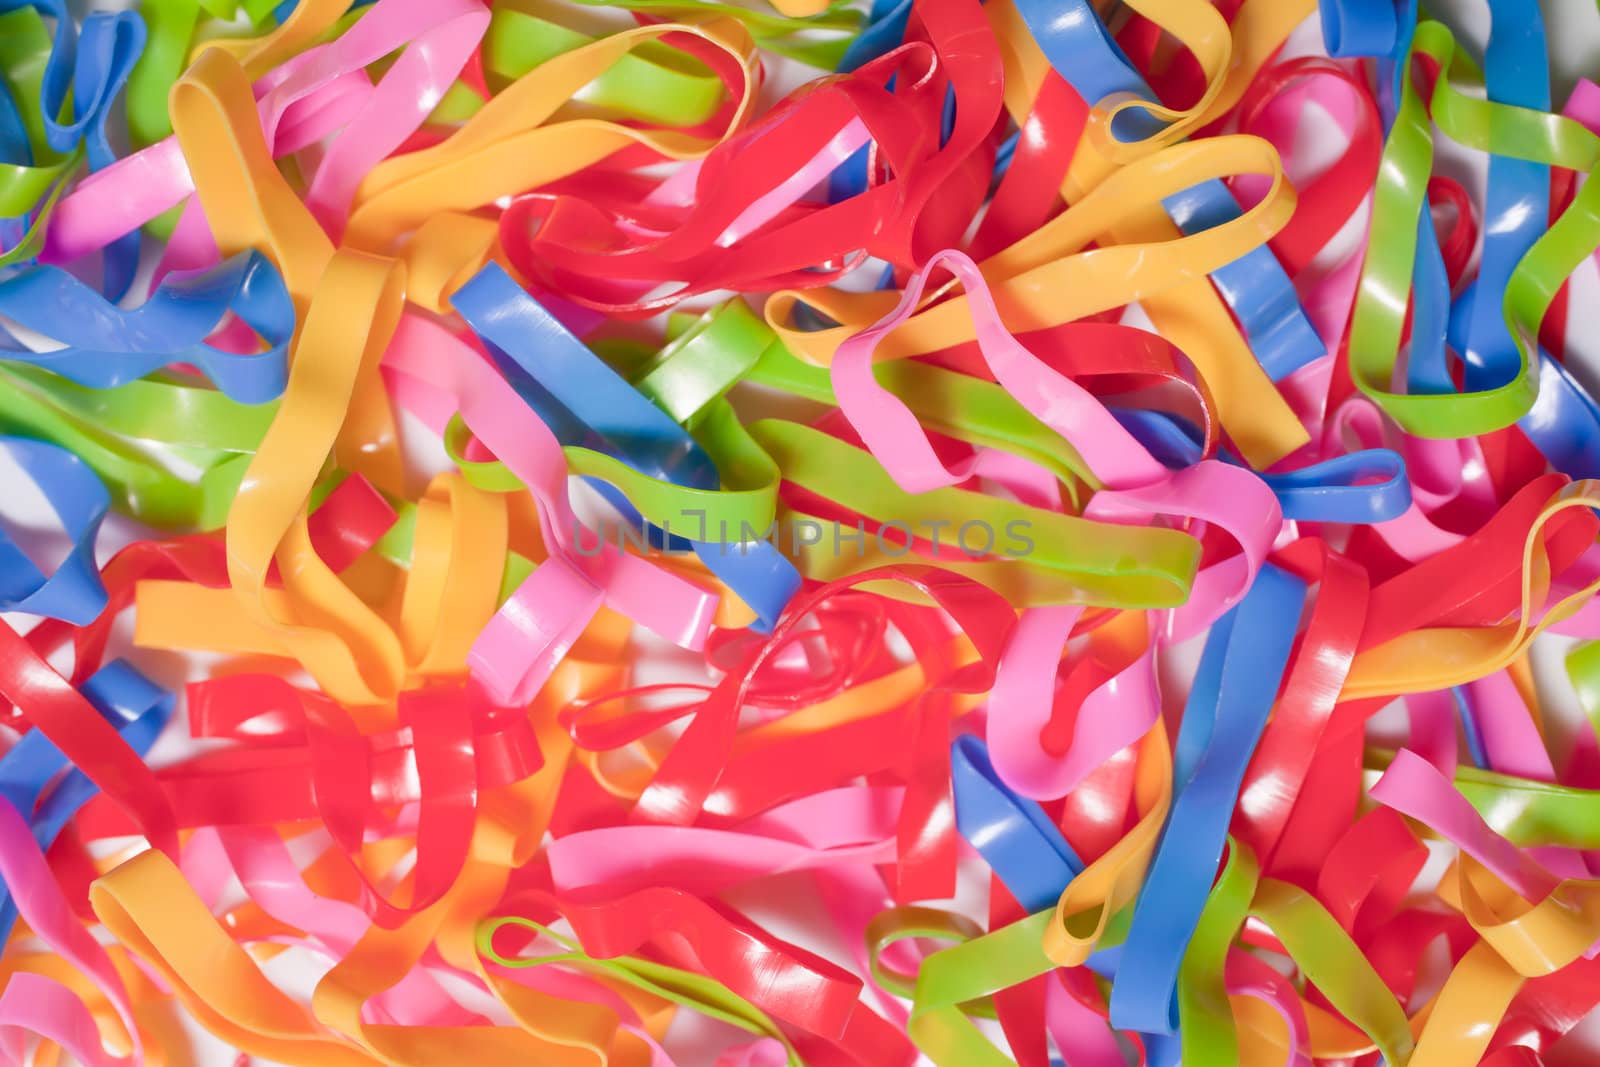 Colorful rubber bands   by Suriyaphoto